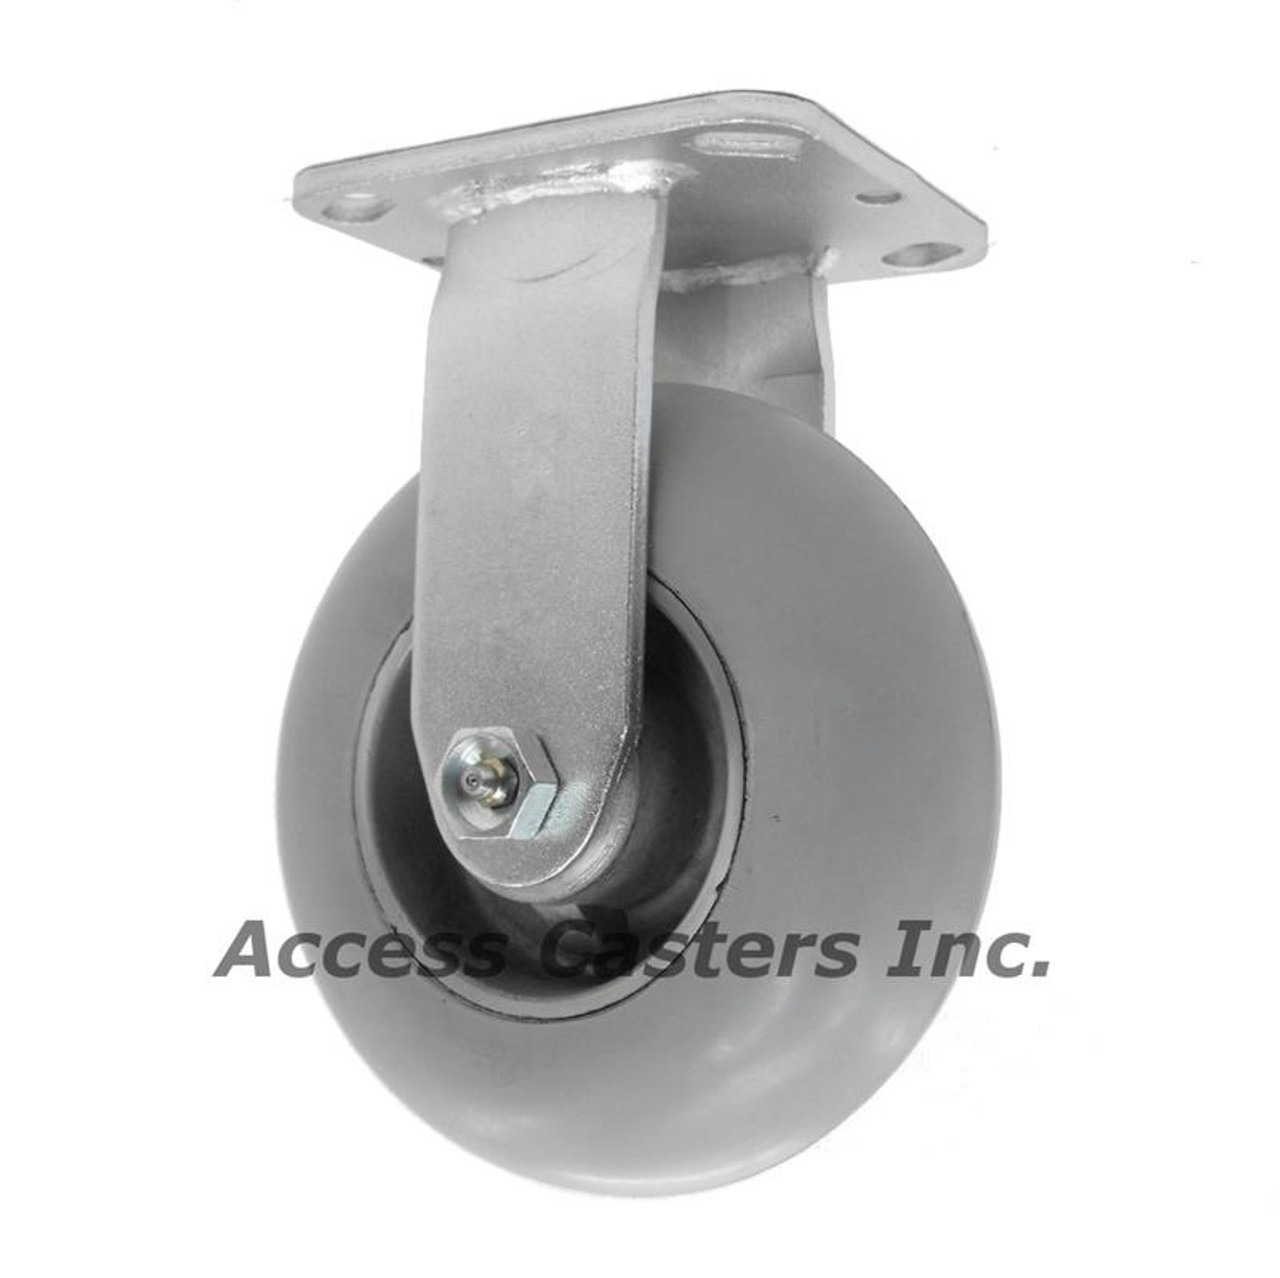 AC1626-R  6 Inch Rigid Caster with Round Tread Wheel for Houskeeping Carts